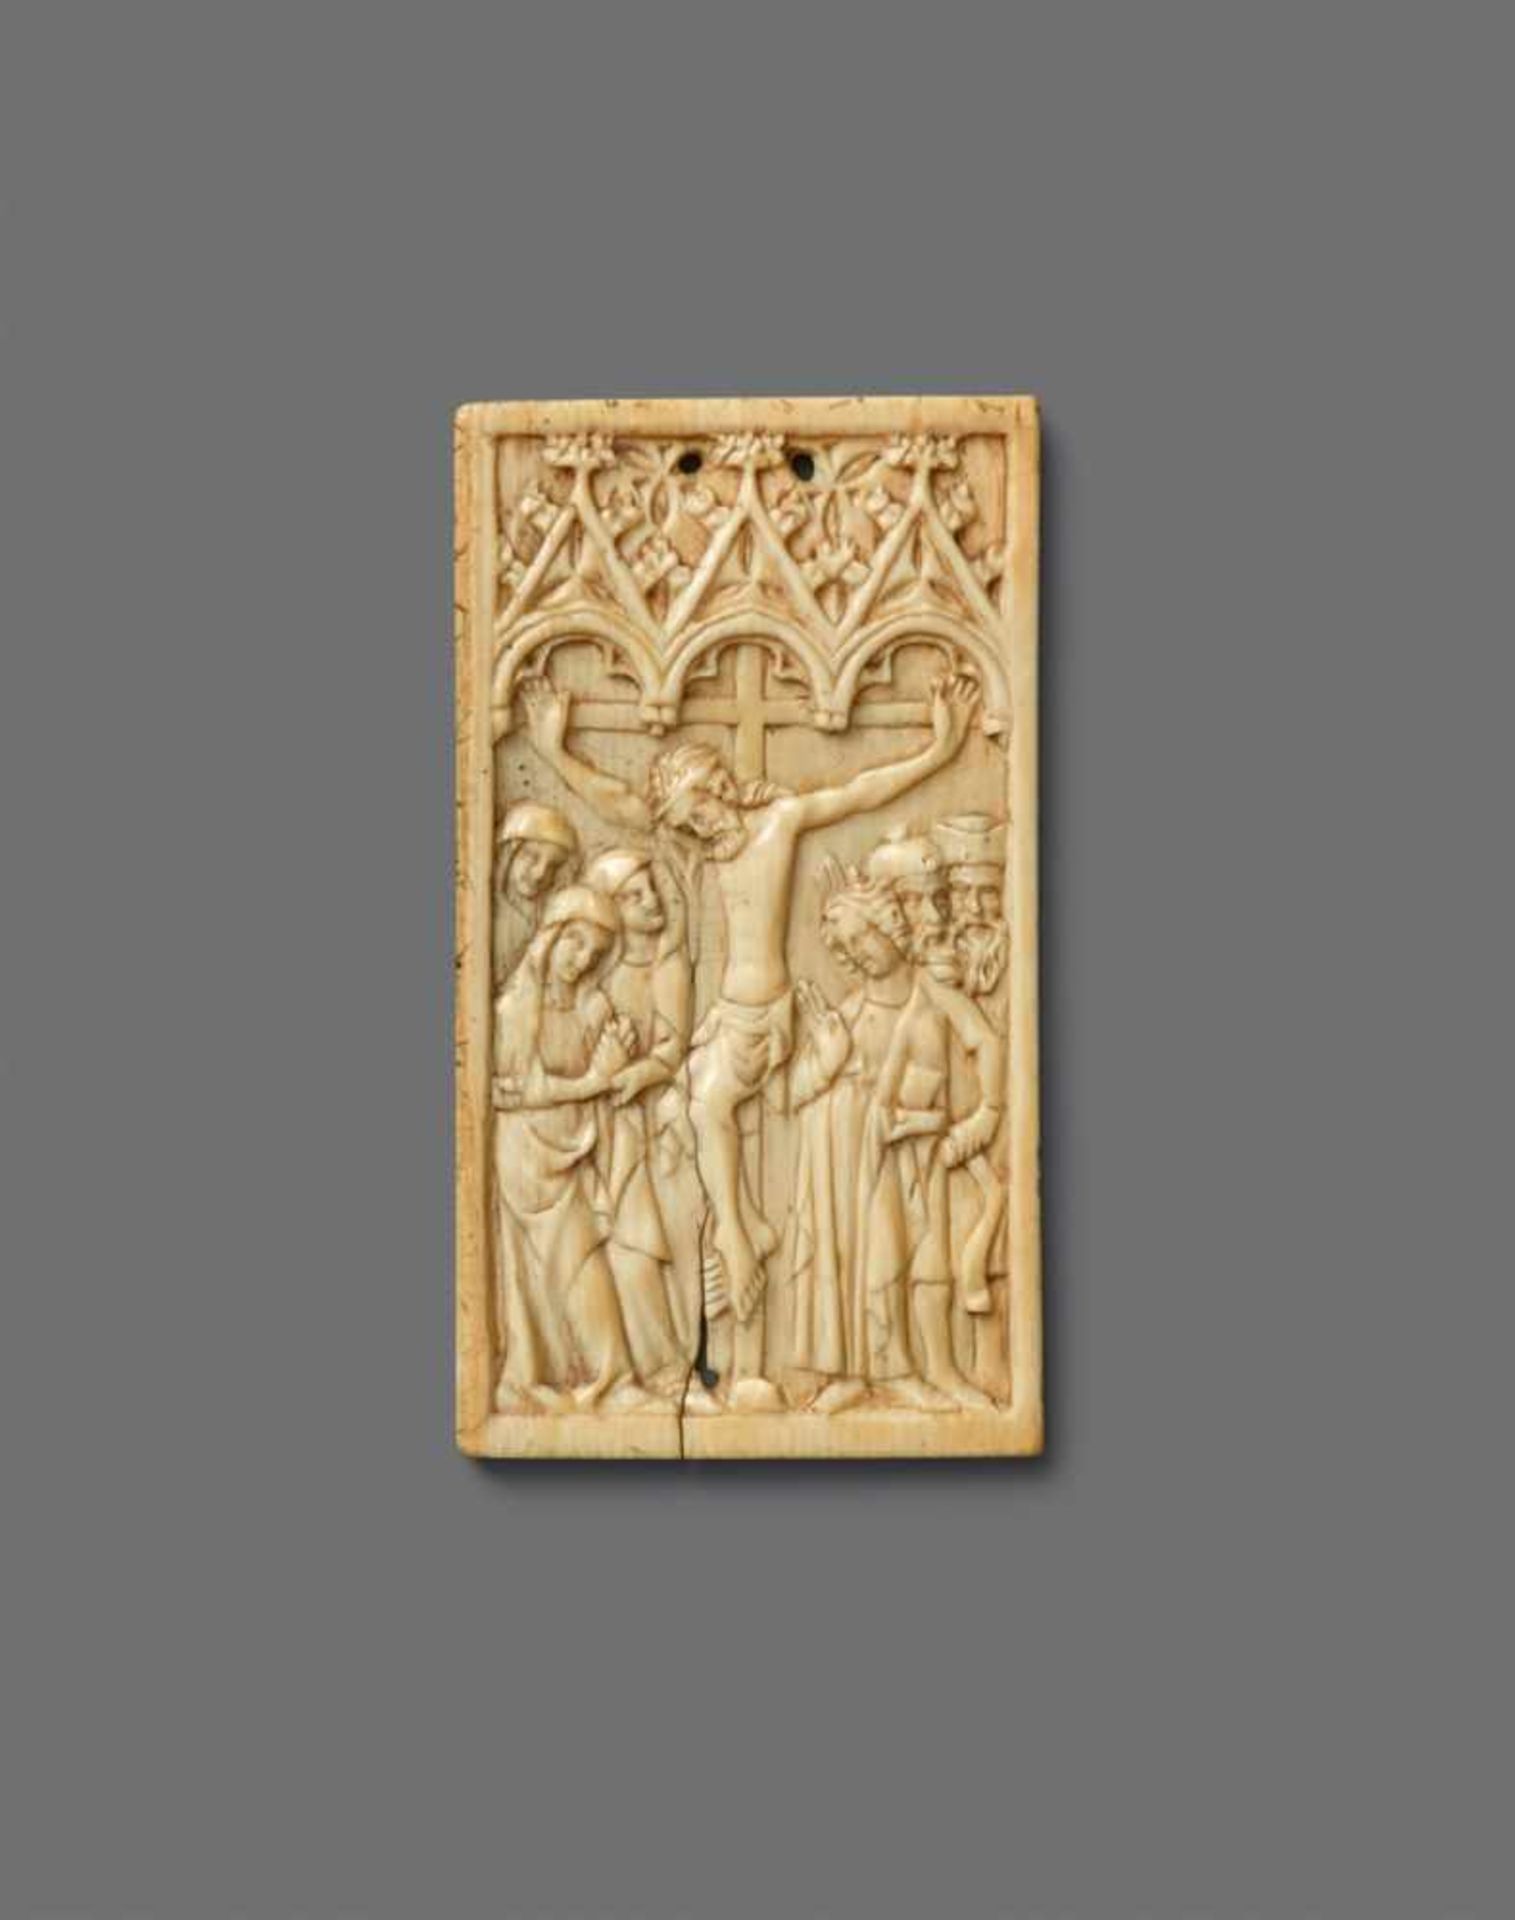 A 15th century French carved ivory Crucifixion reliefWith minimal remains of partially overpainted